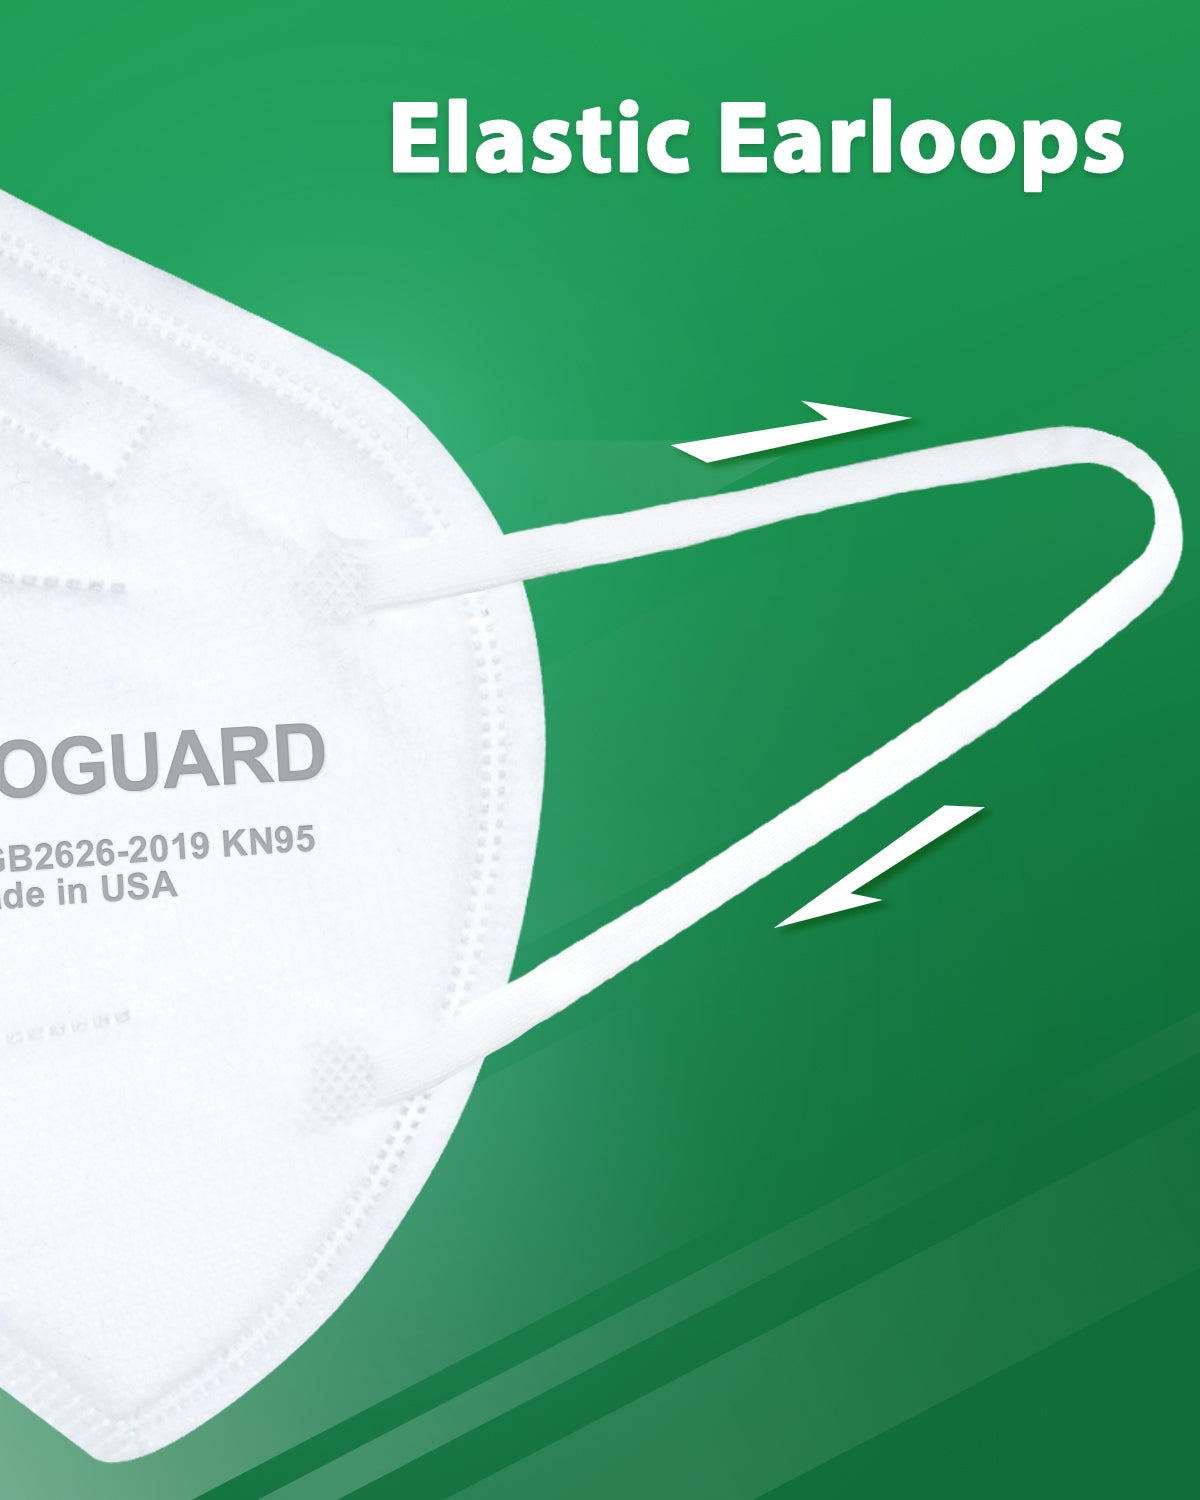 Made in USA EG EcoGuard KN95 Face Mask 5-Layers Protection, 12 Pcs